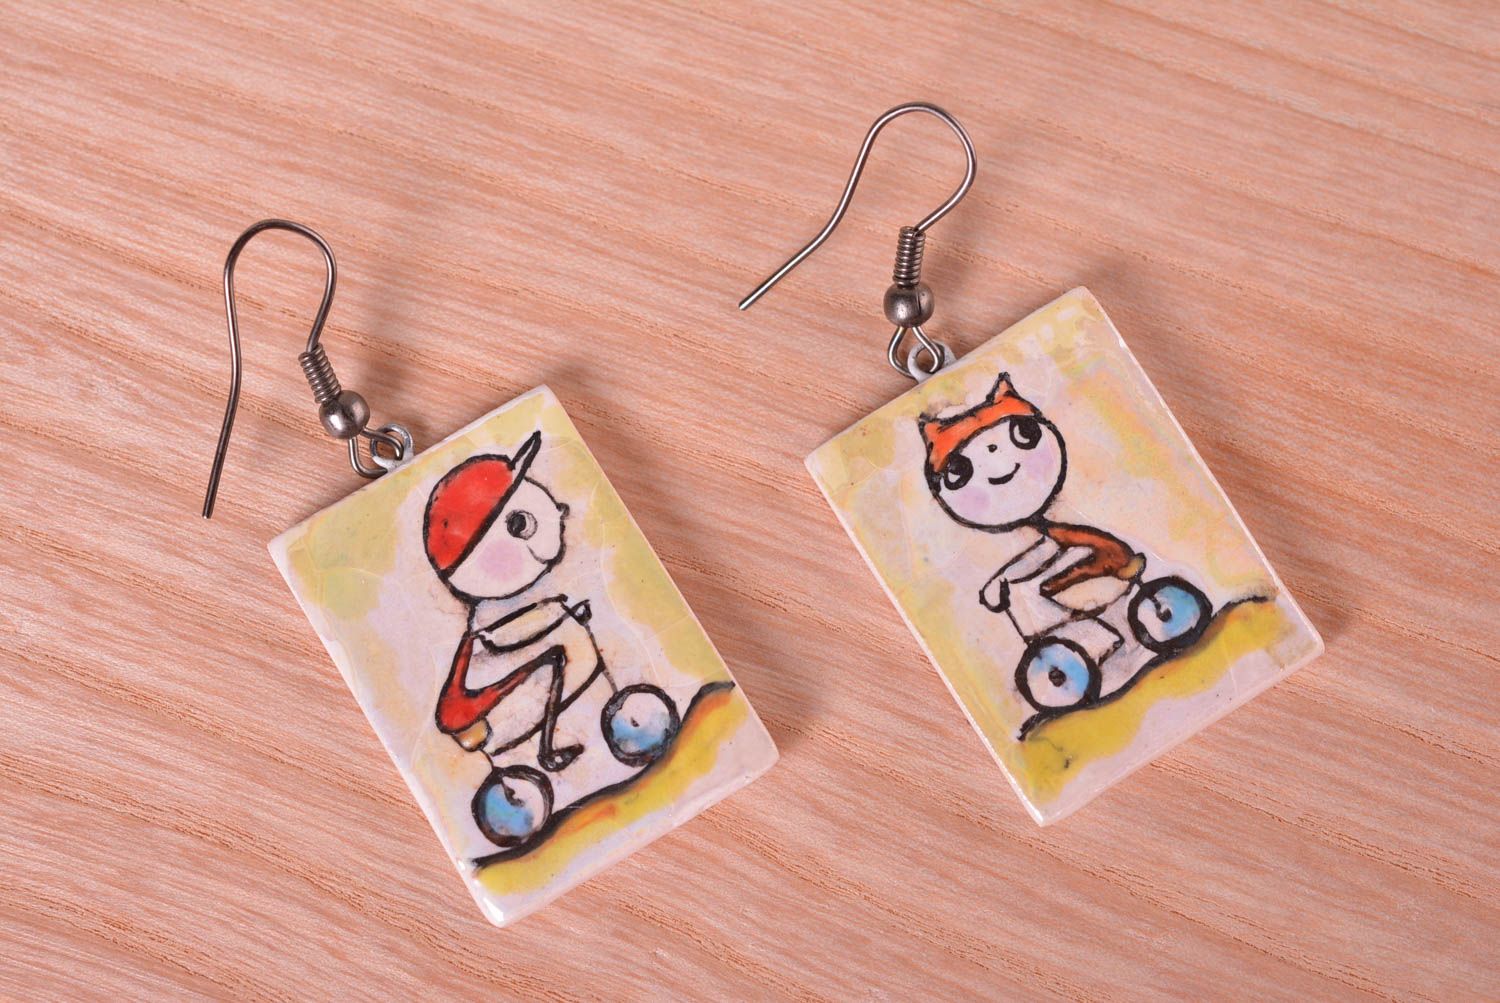 Homemade jewelry designer earrings cute earrings gifts for girls unique jewelry photo 2